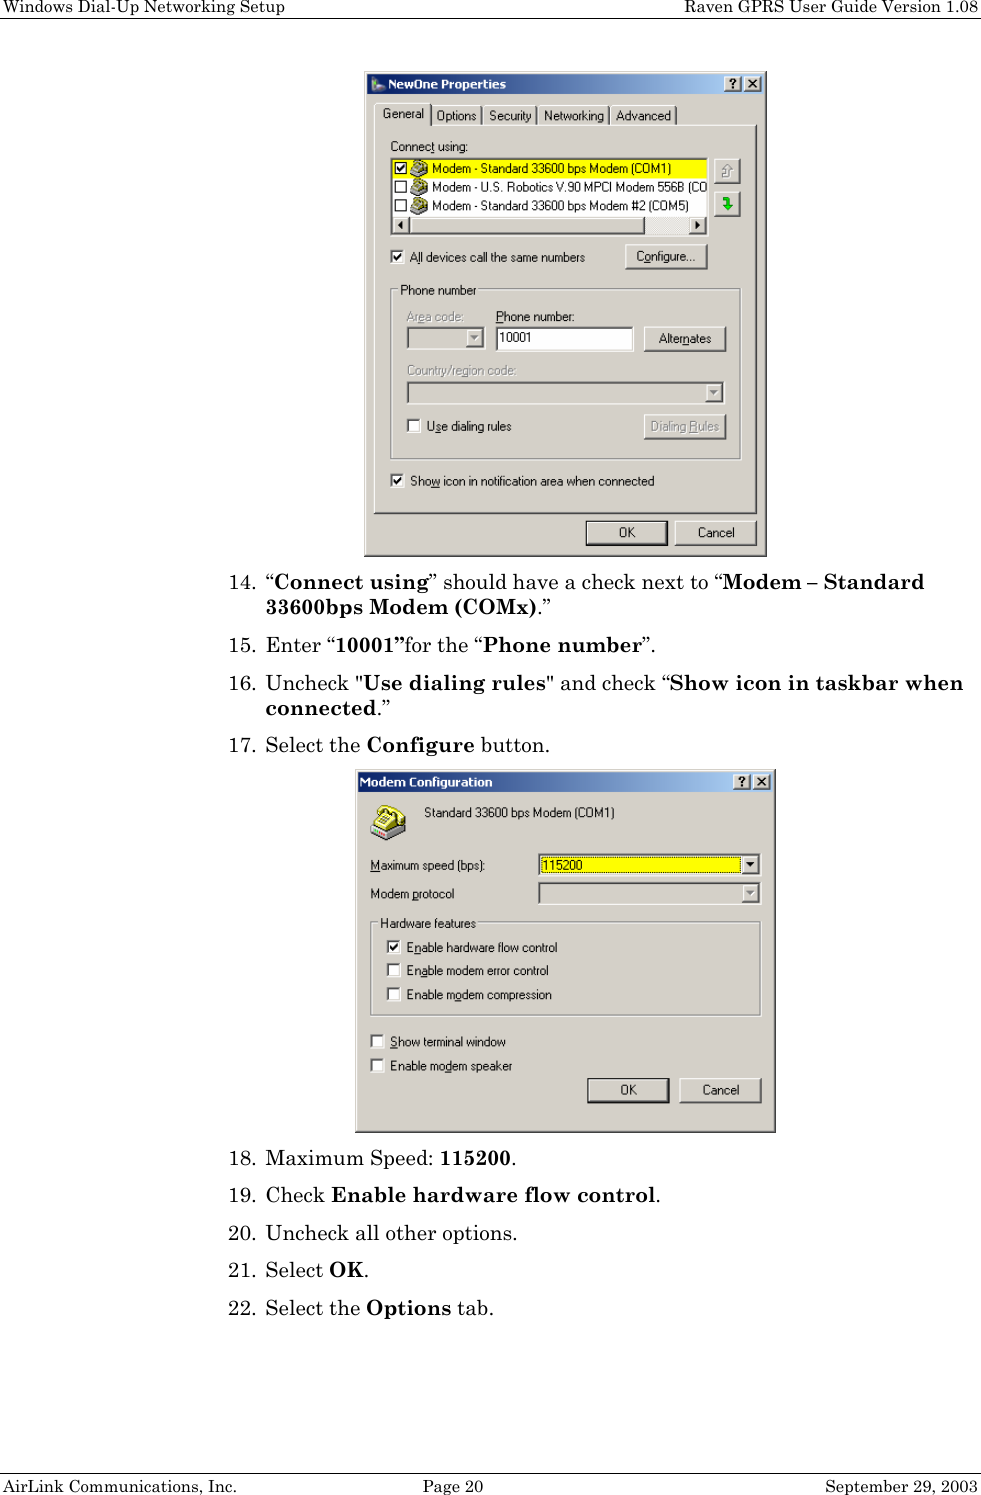 Windows Dial-Up Networking Setup    Raven GPRS User Guide Version 1.08 AirLink Communications, Inc.  Page 20  September 29, 2003  14. “Connect using” should have a check next to “Modem – Standard 33600bps Modem (COMx).” 15. Enter “10001”for the “Phone number”. 16. Uncheck &quot;Use dialing rules&quot; and check “Show icon in taskbar when connected.” 17. Select the Configure button.  18. Maximum Speed: 115200. 19. Check Enable hardware flow control. 20. Uncheck all other options. 21. Select OK. 22. Select the Options tab. 